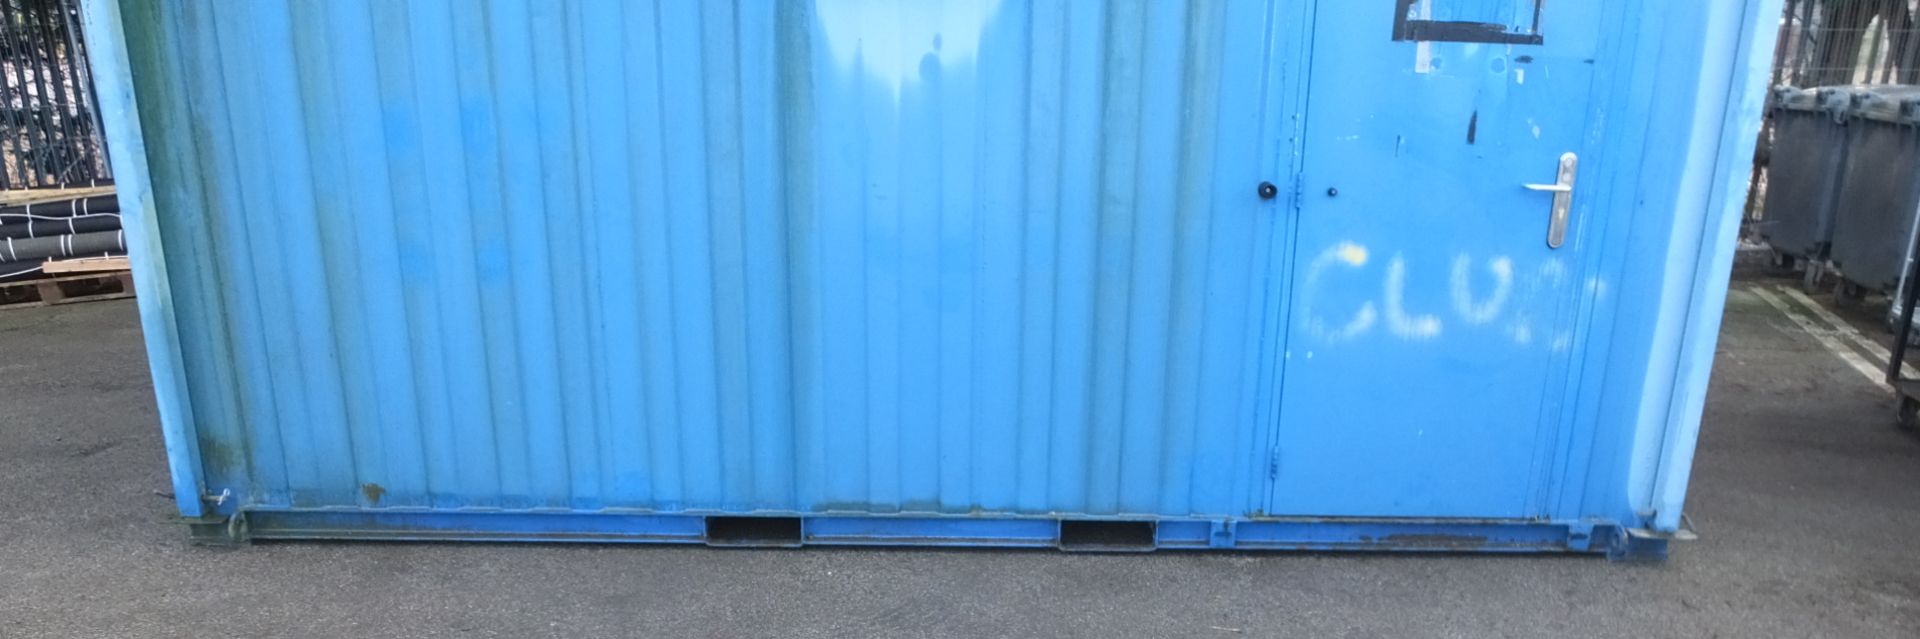 Blue Containerised Toilet Block - L 3050mm x D 2440mm x H 2600mm - Image 4 of 20